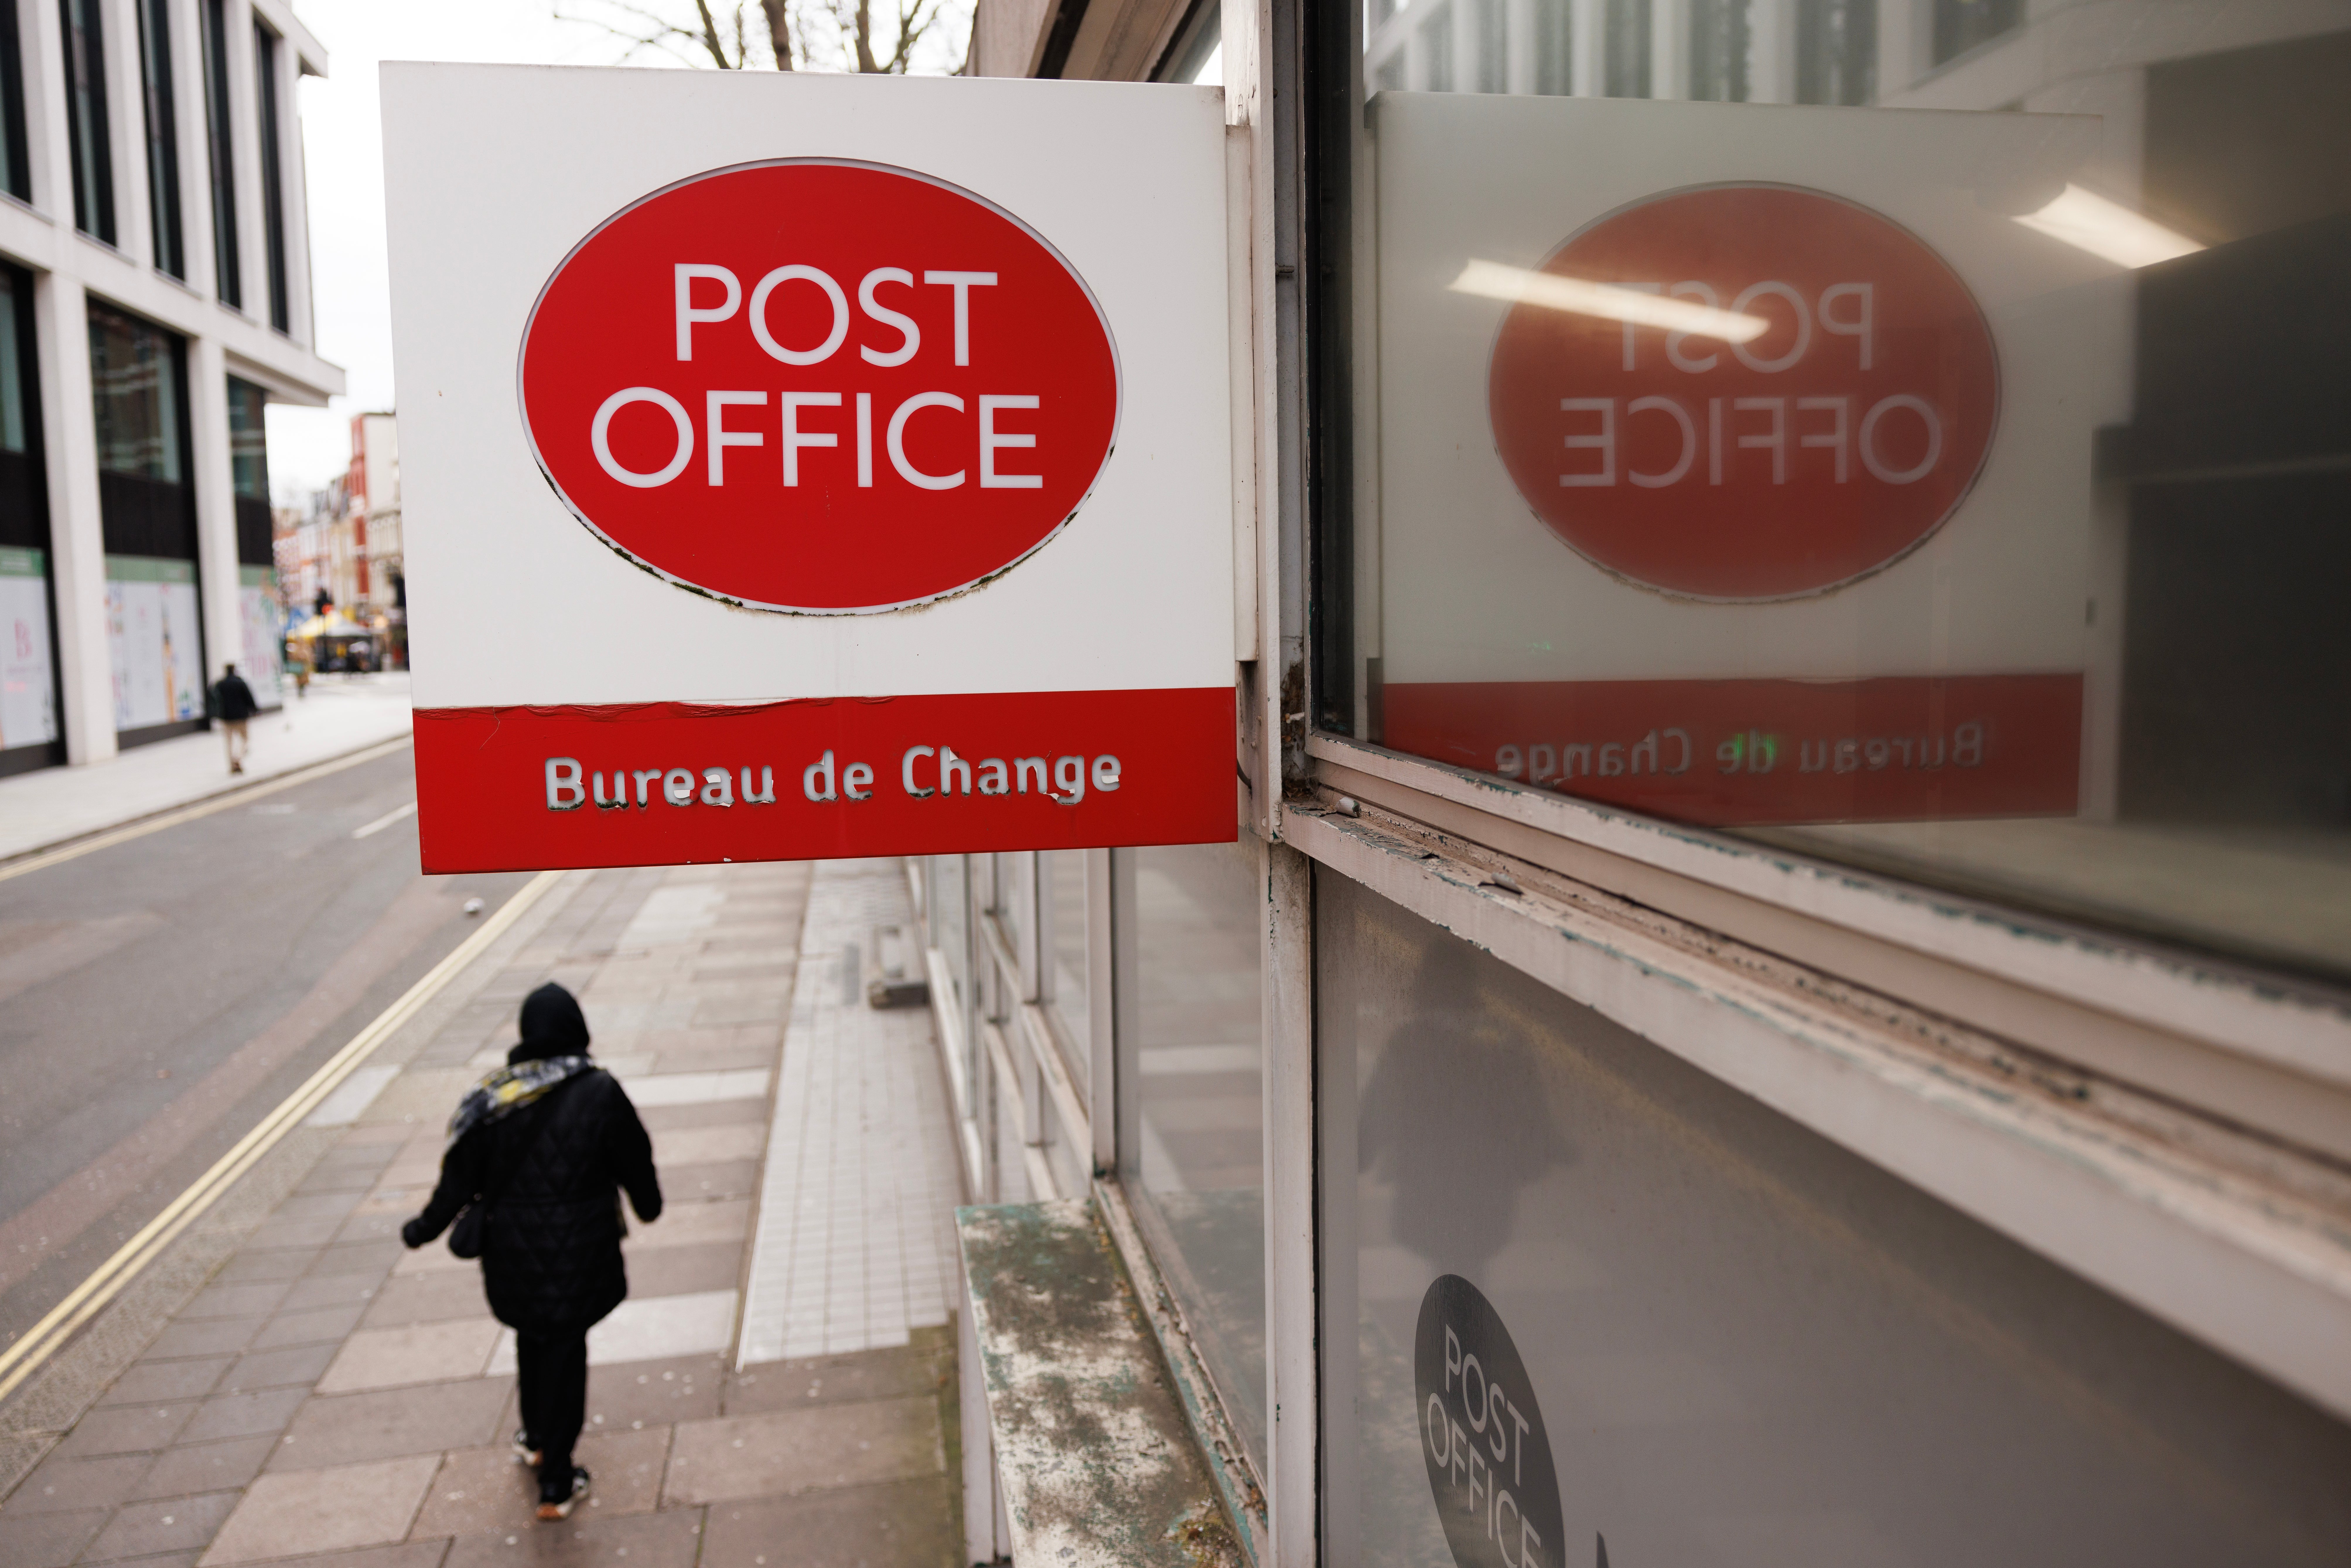 A criminal probe into the Post Office scandal could take years